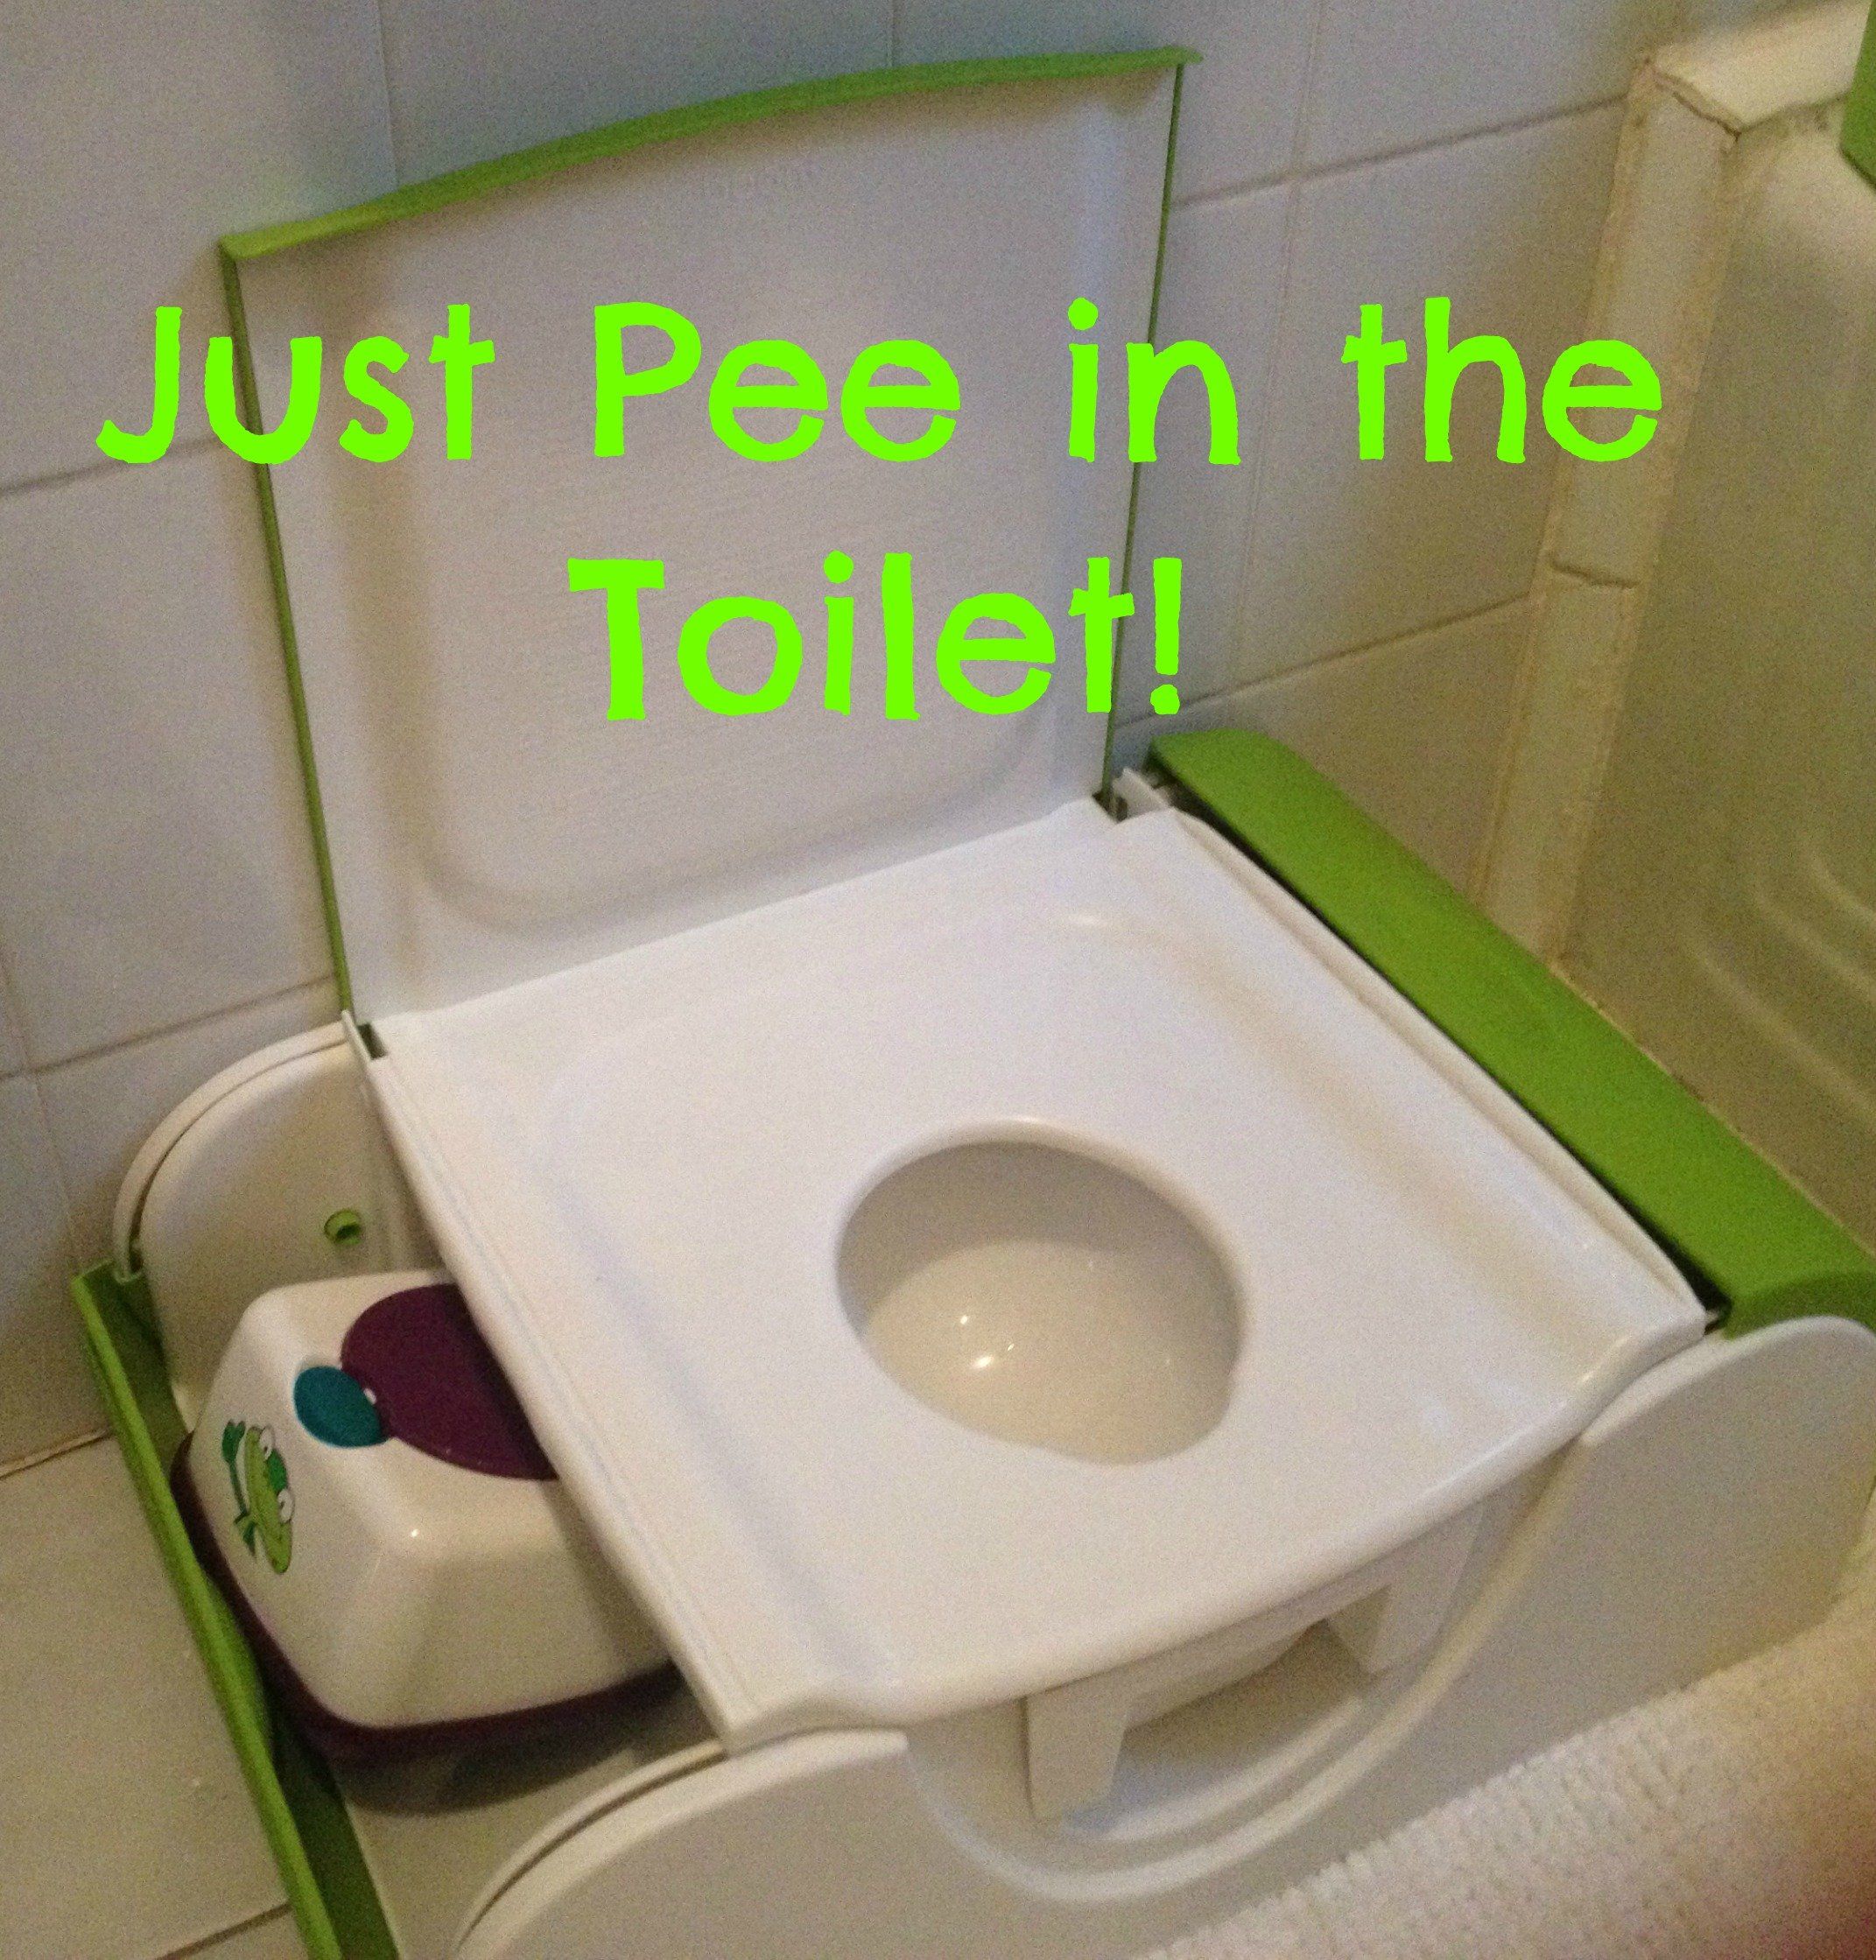 Peeing in the toilet